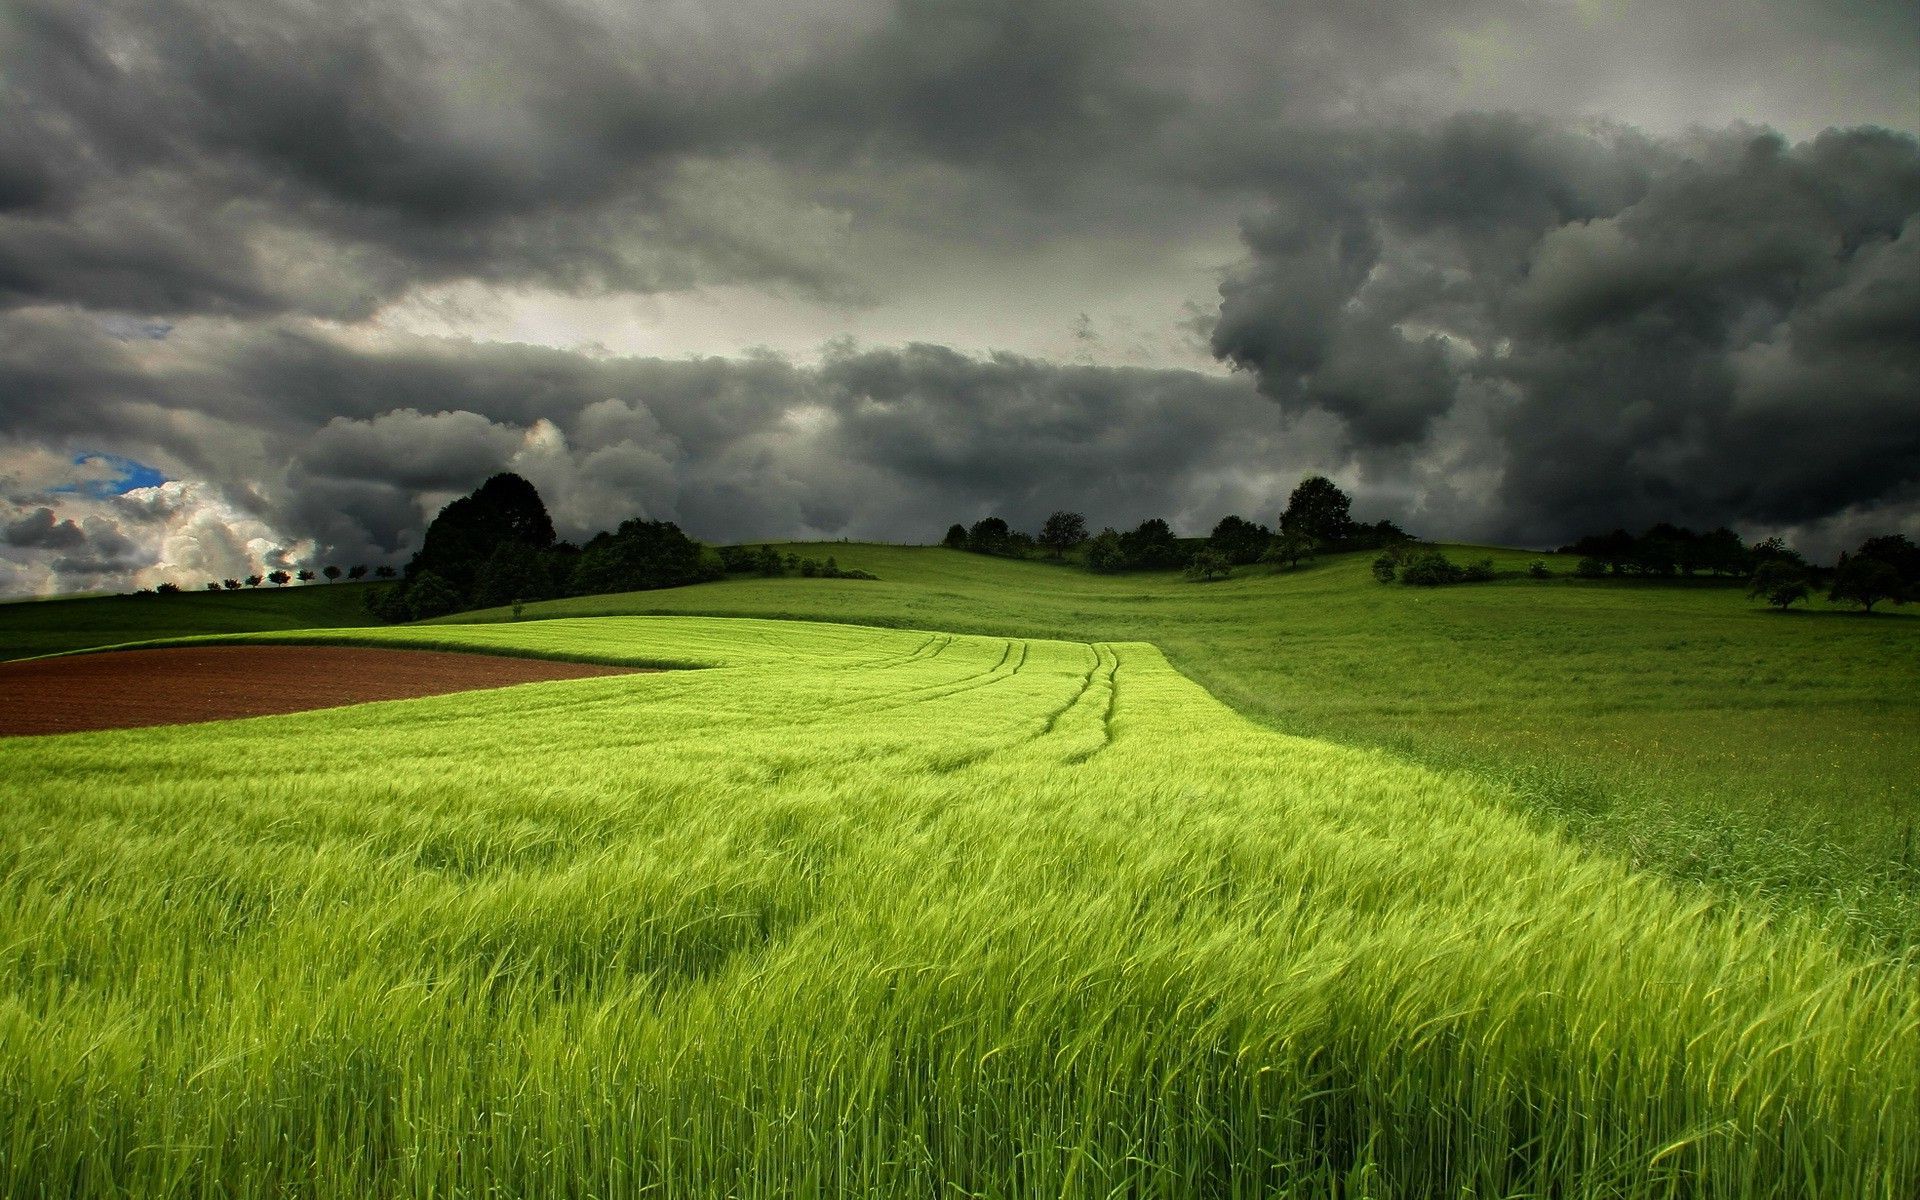 Storm clouds brewing over the field HD Wallpaper 1920x1080 Storm 1920x1200